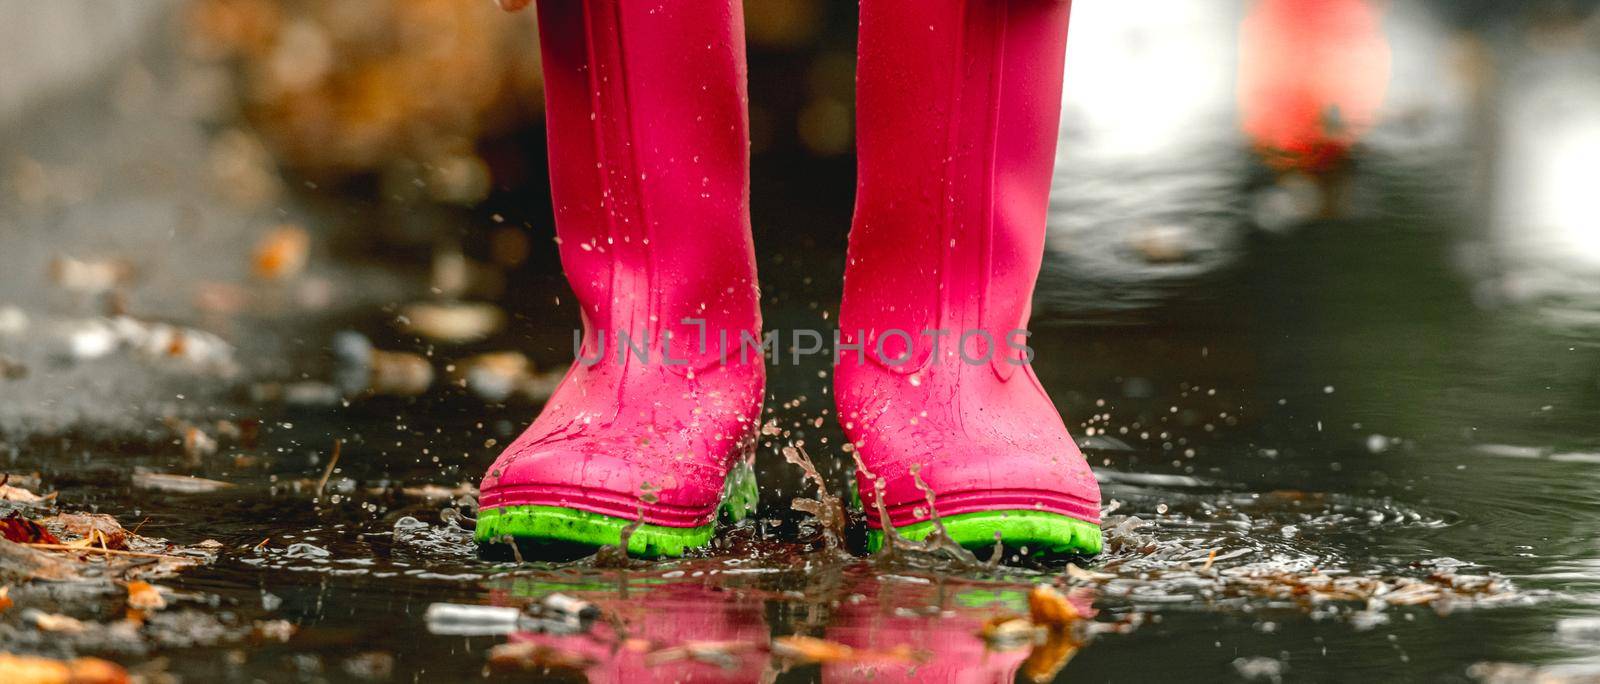 Child in rubber boots by tan4ikk1